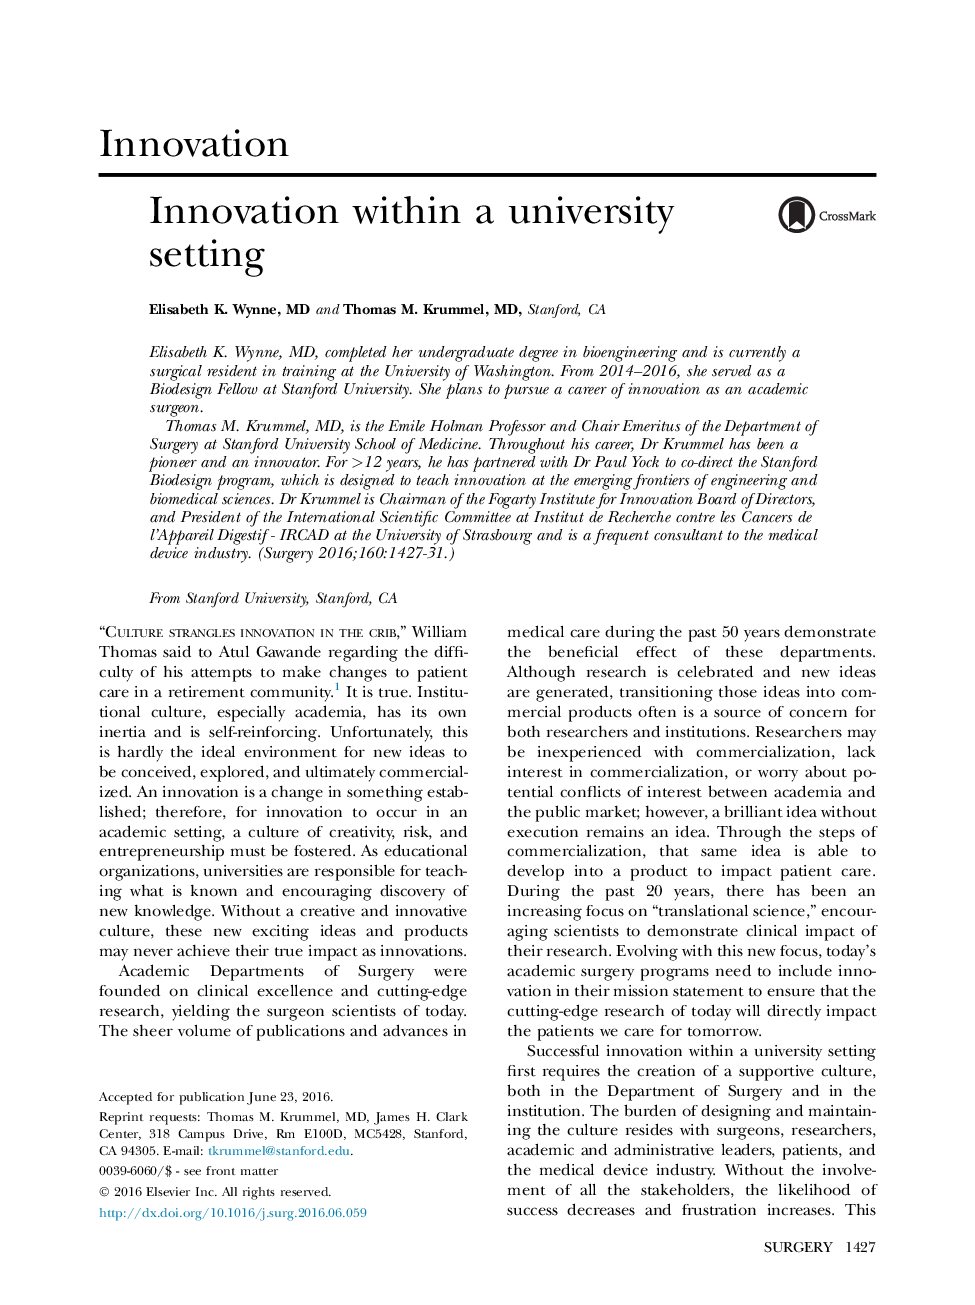 Innovation within a university setting